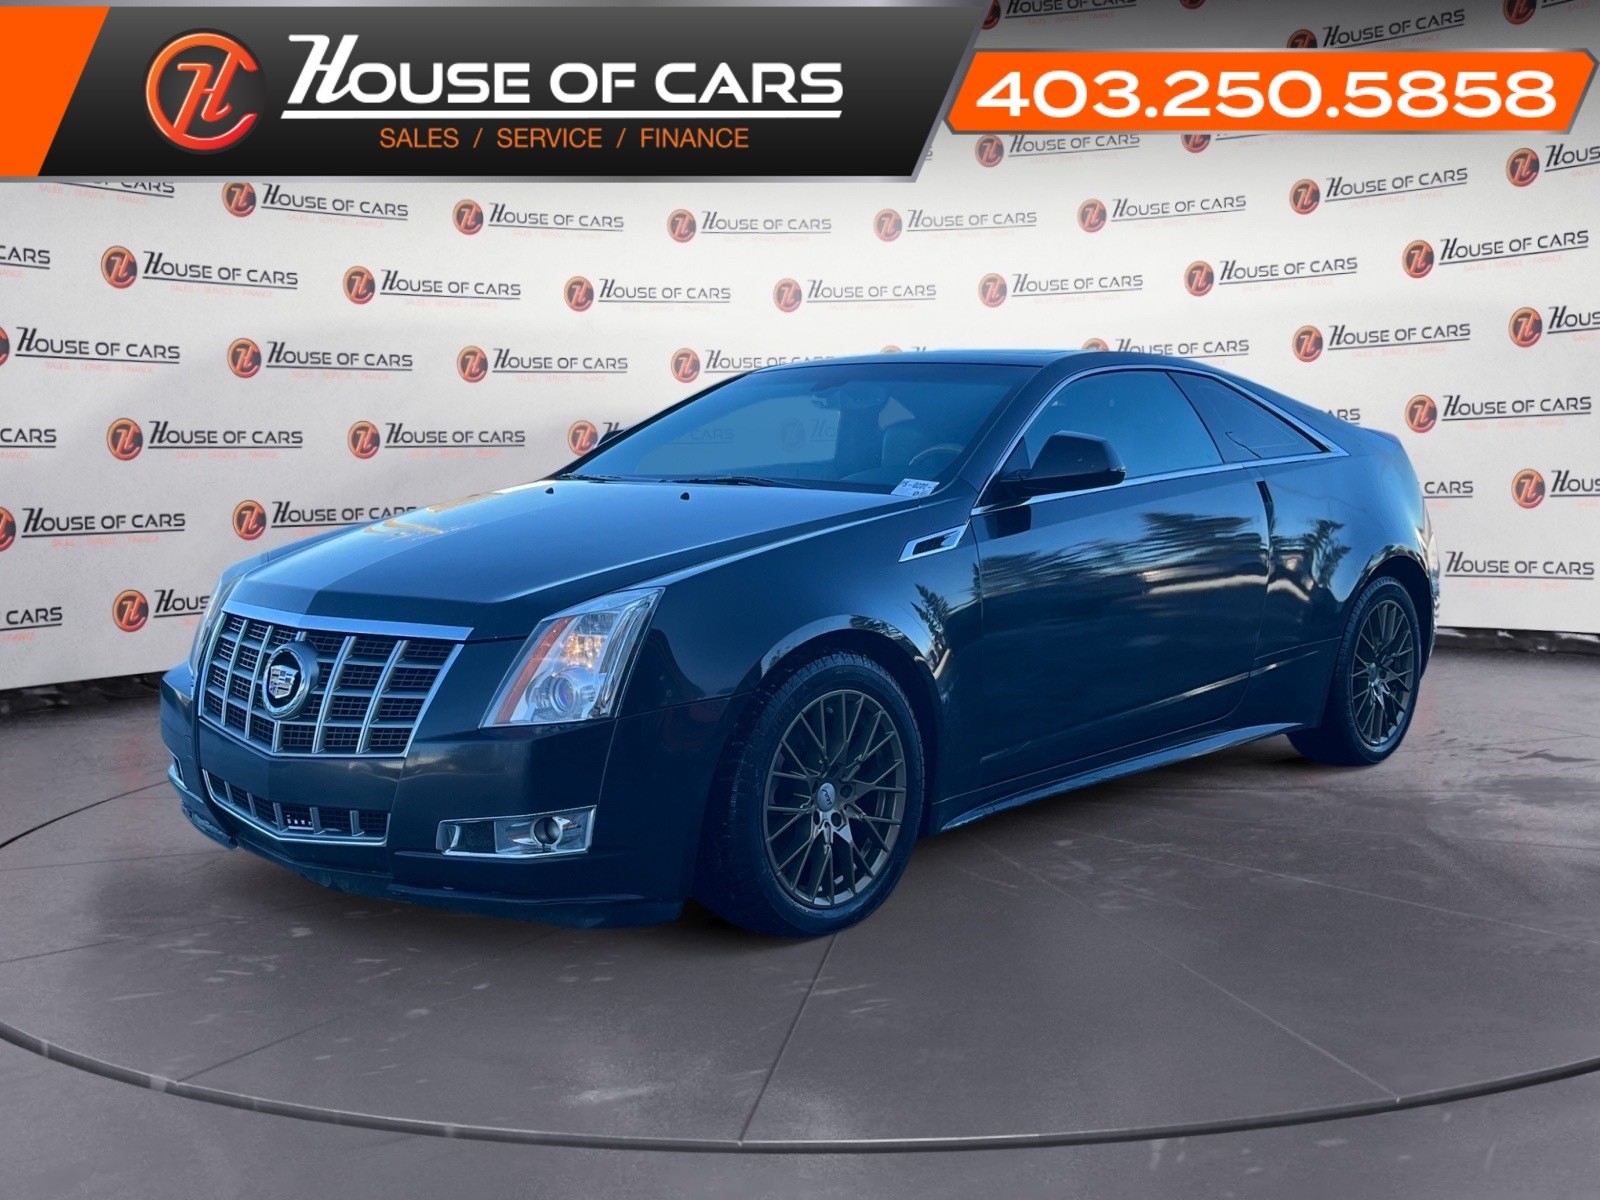 2012 Cadillac CTS 2dr Cpe Performance AWD